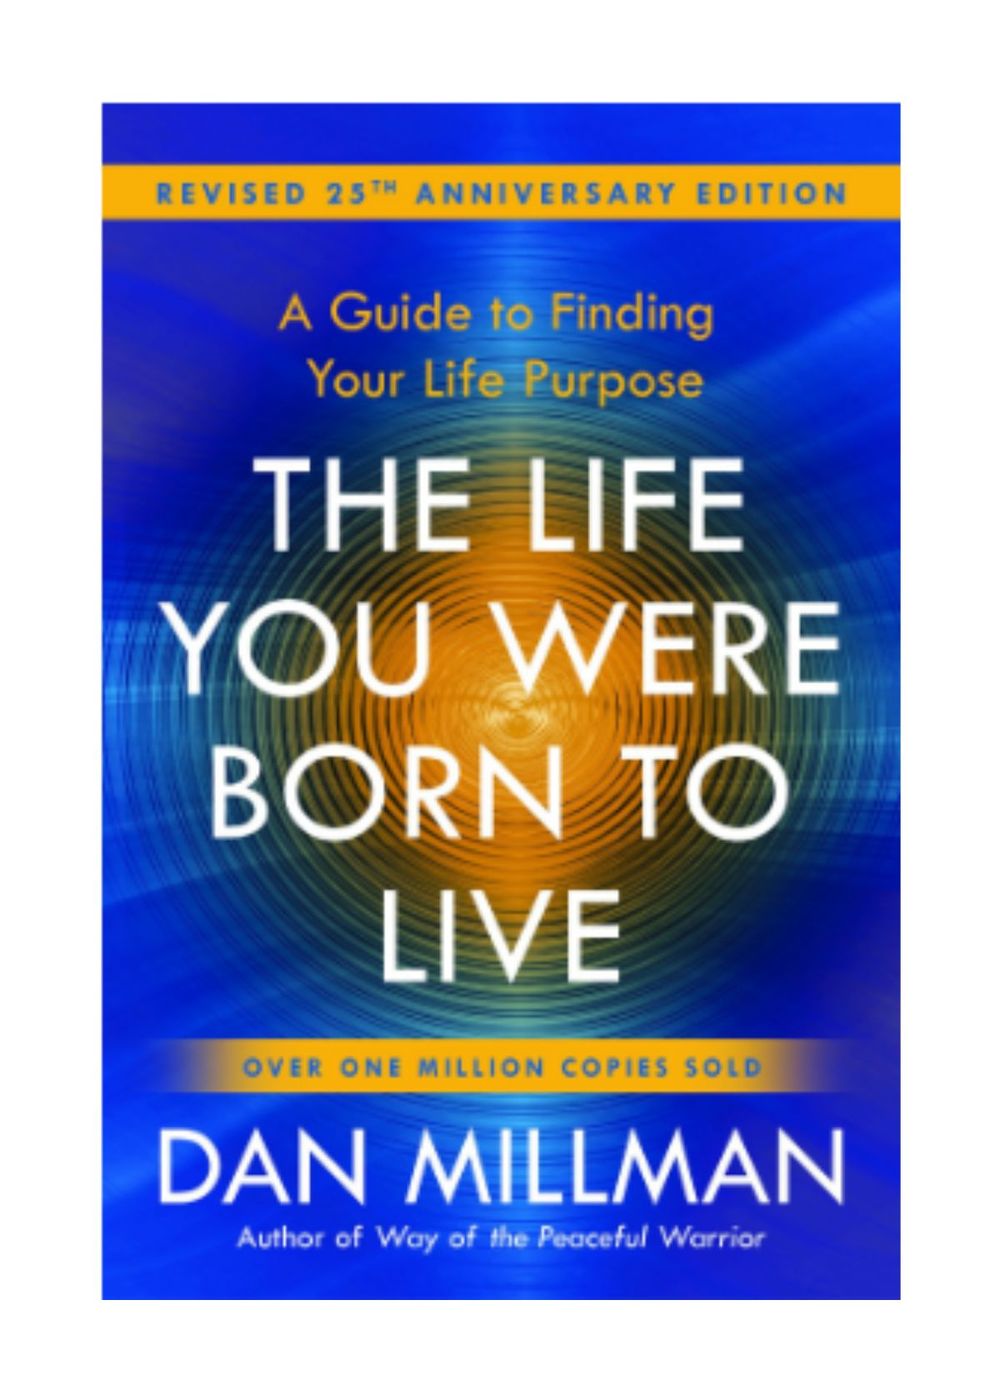 The-Life-You-Were-Born-to-Live-by-Dan-Millman